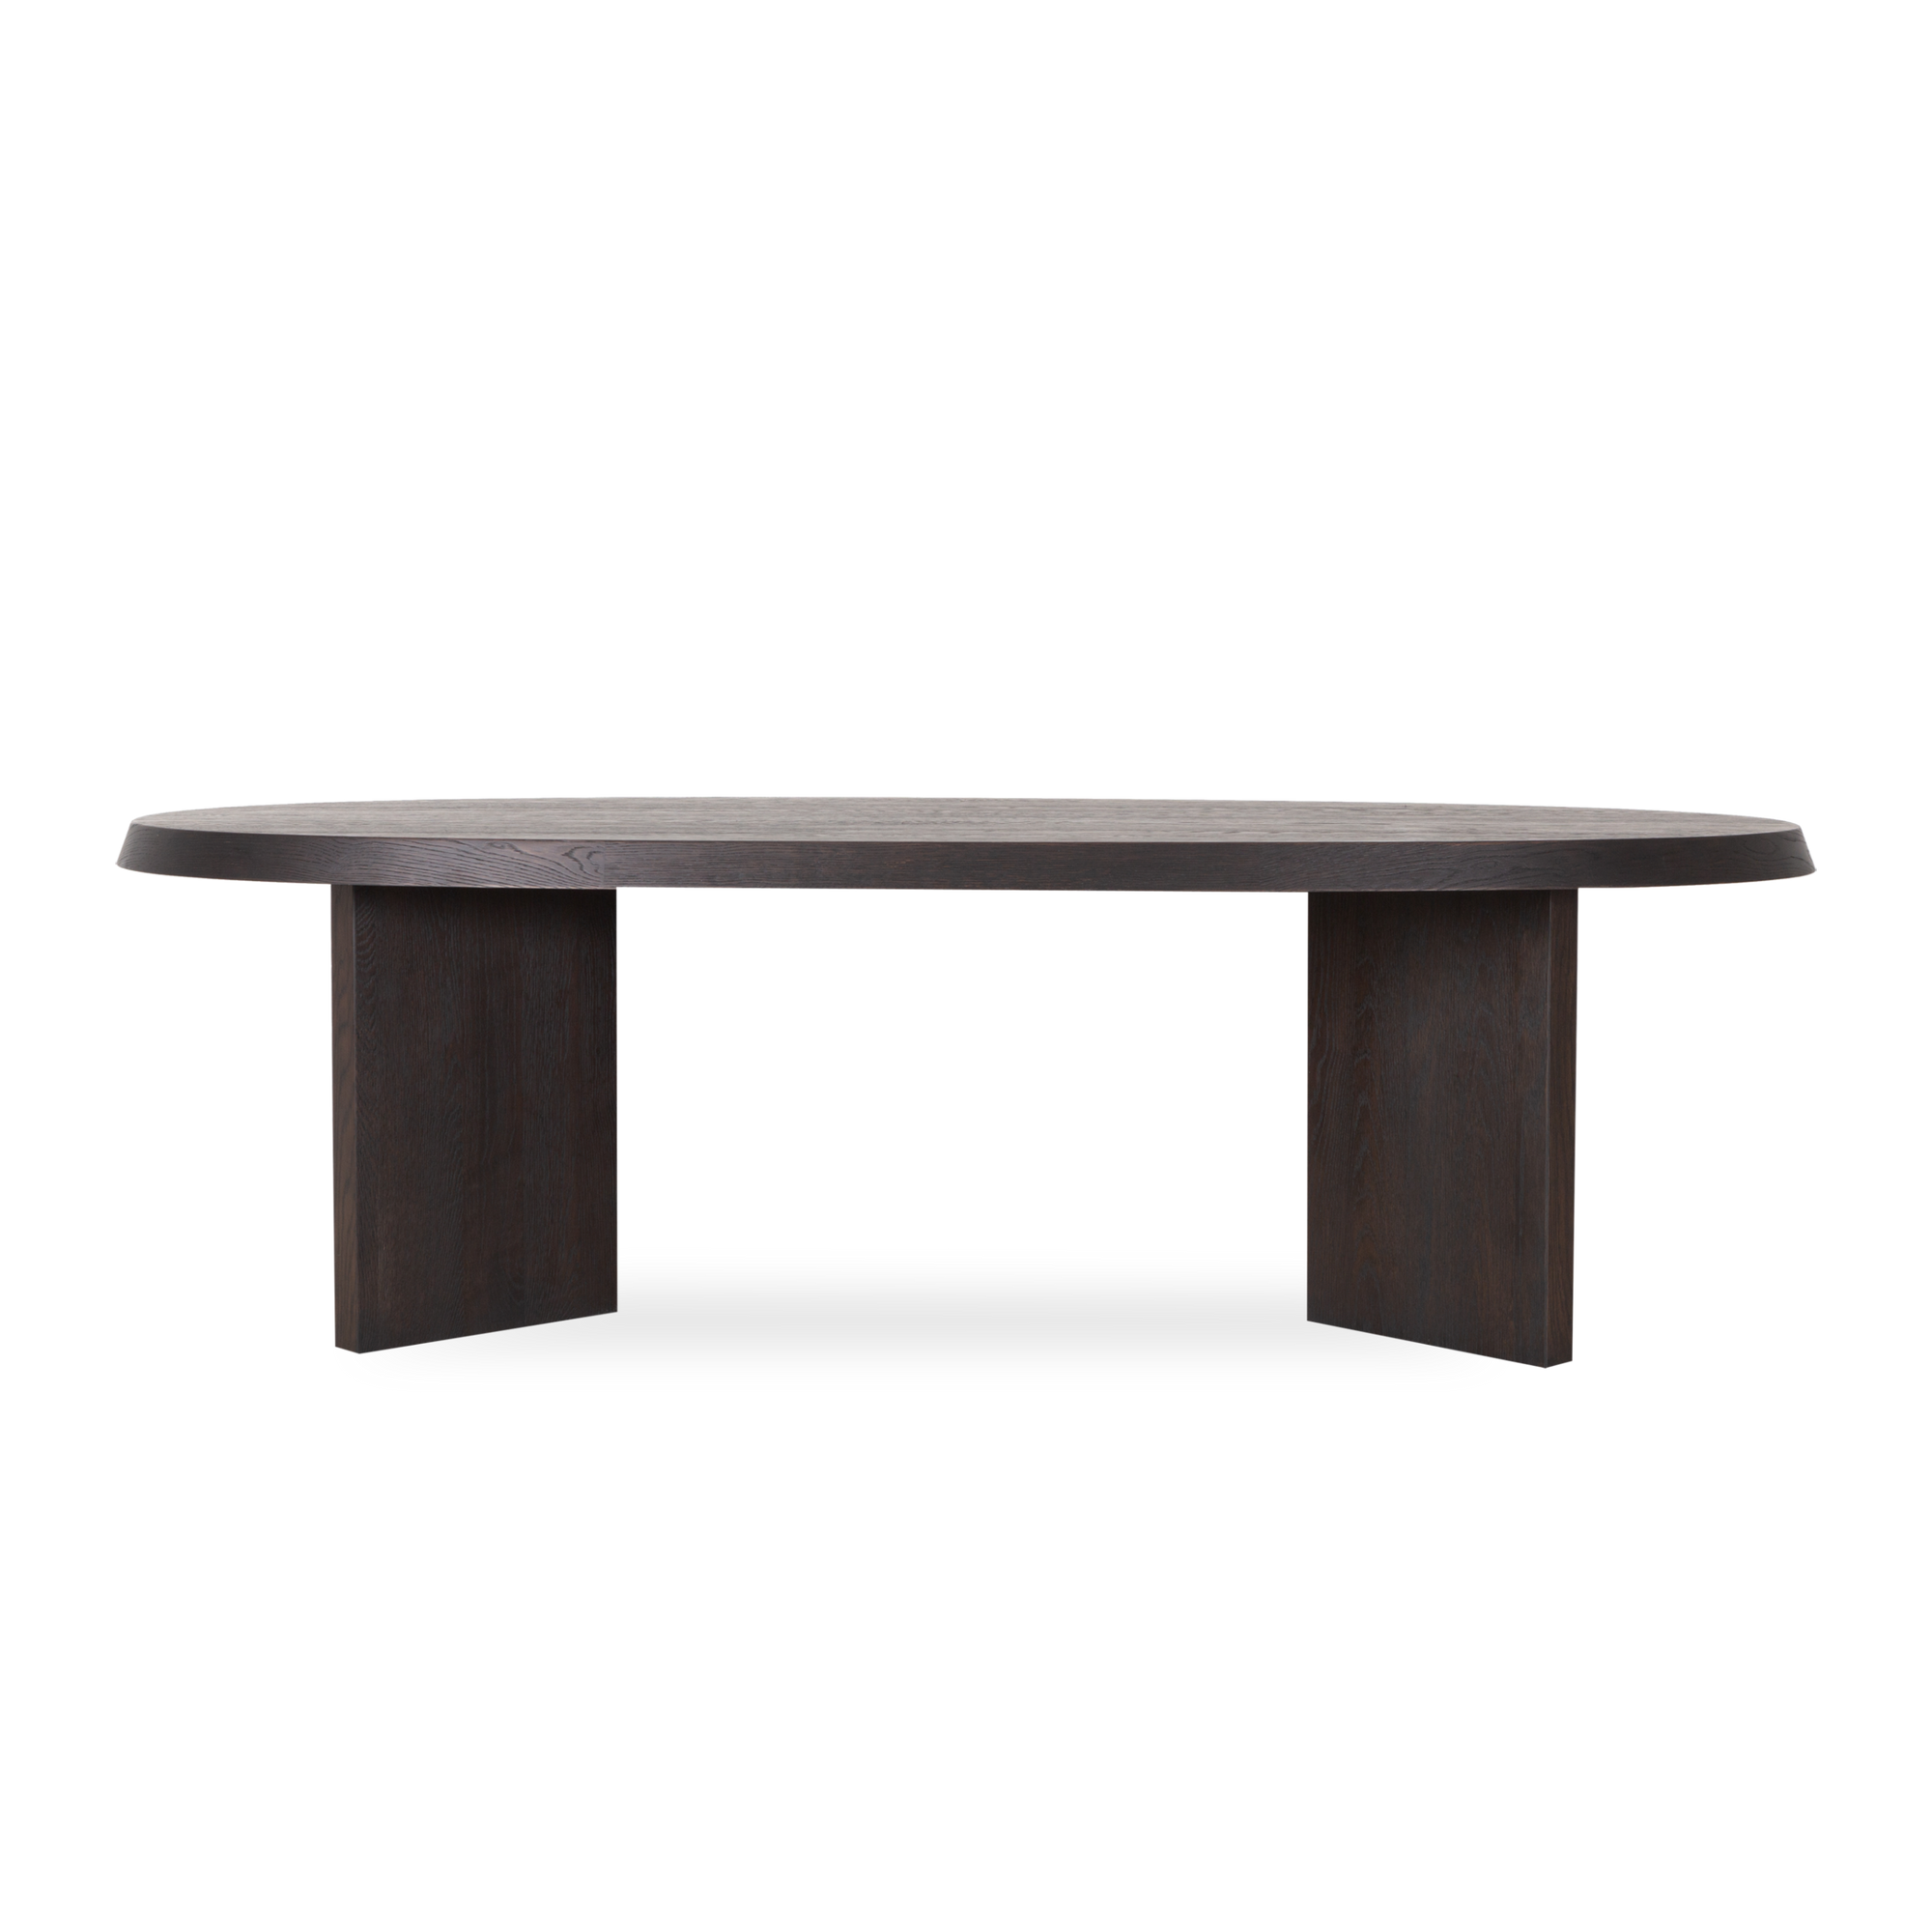 With its bold, geometric proportions, the Ellipse Dining Table has a simple and soothing form.